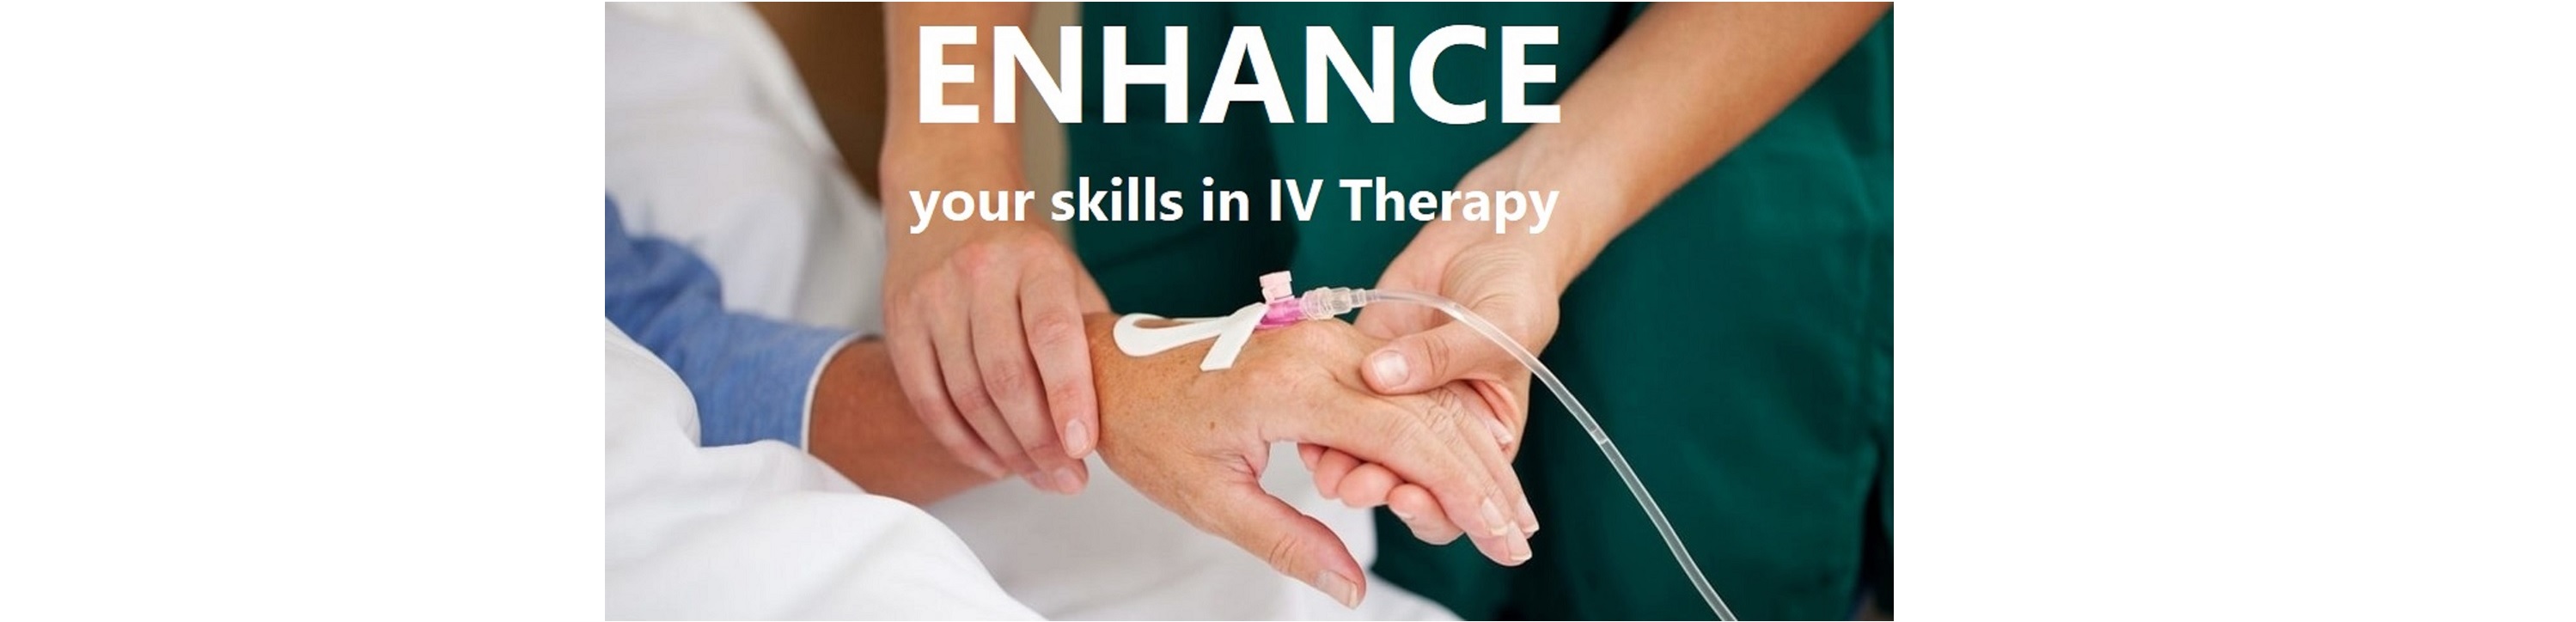 IV Therapy Course - Saturday, January 18, 2020 Banner